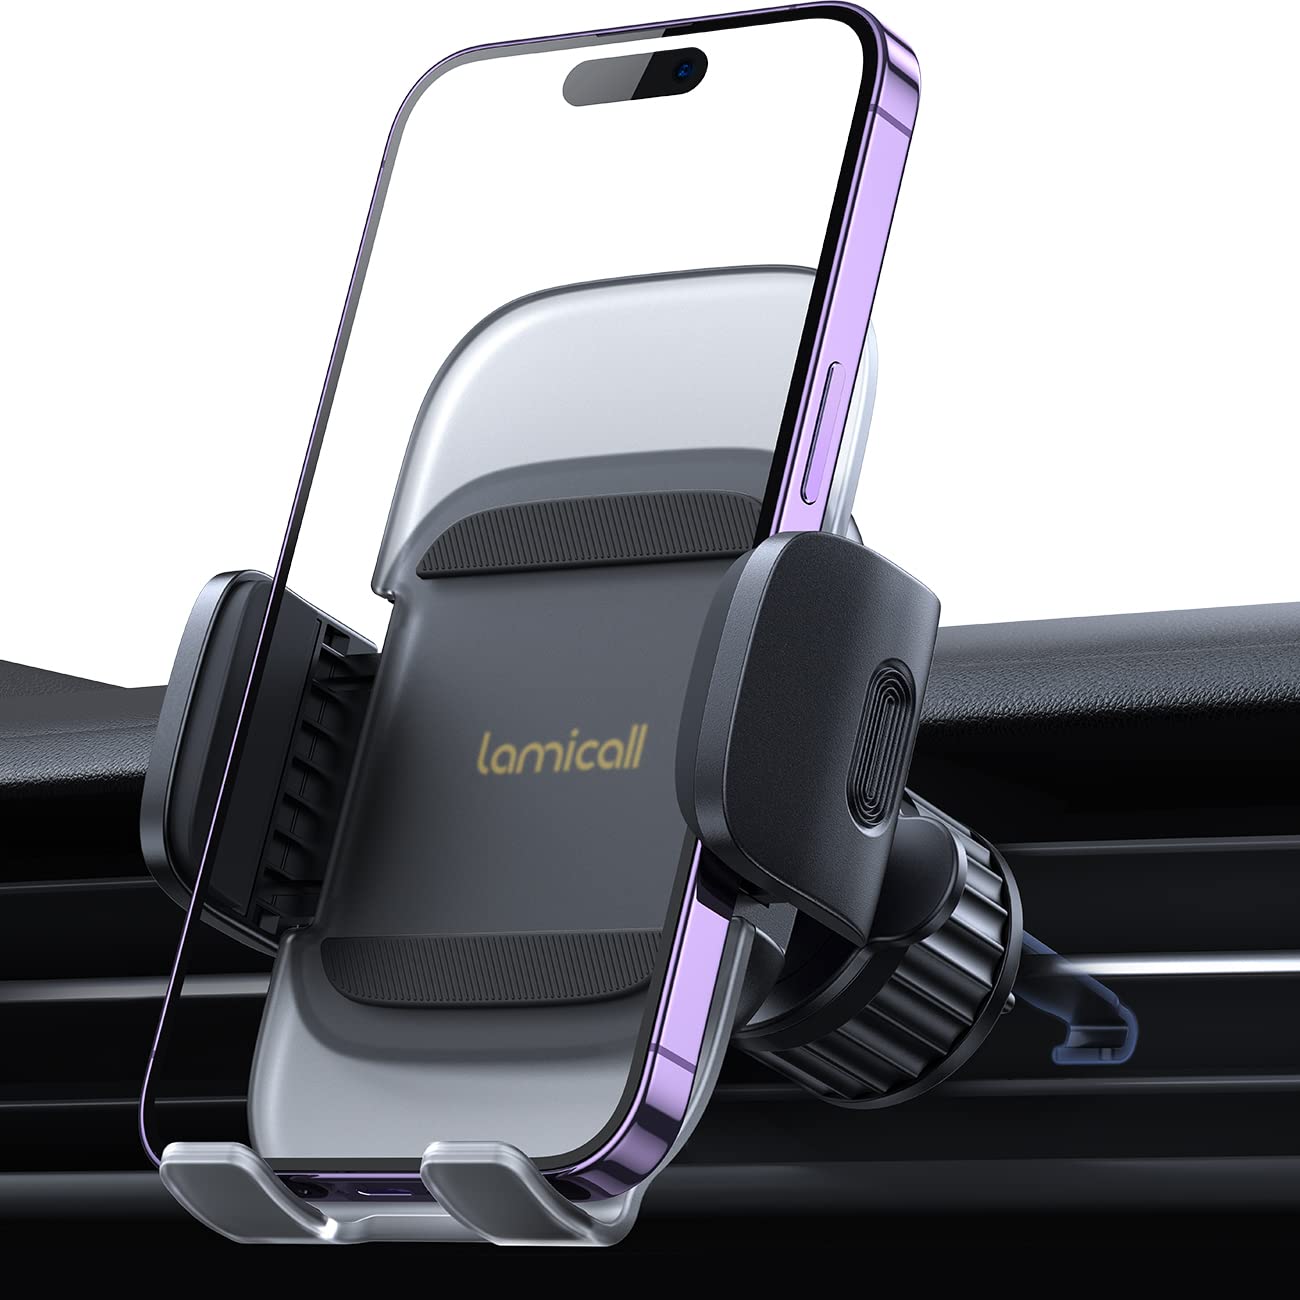 Lamicall Phone Holder Car Vent - Wider Spring Clamp [Big Phone Friendly] Air Vent Cell Phone Mount for Car Hands Free Automobile Cradle Clip for iPhone, Android Smartphone, 4